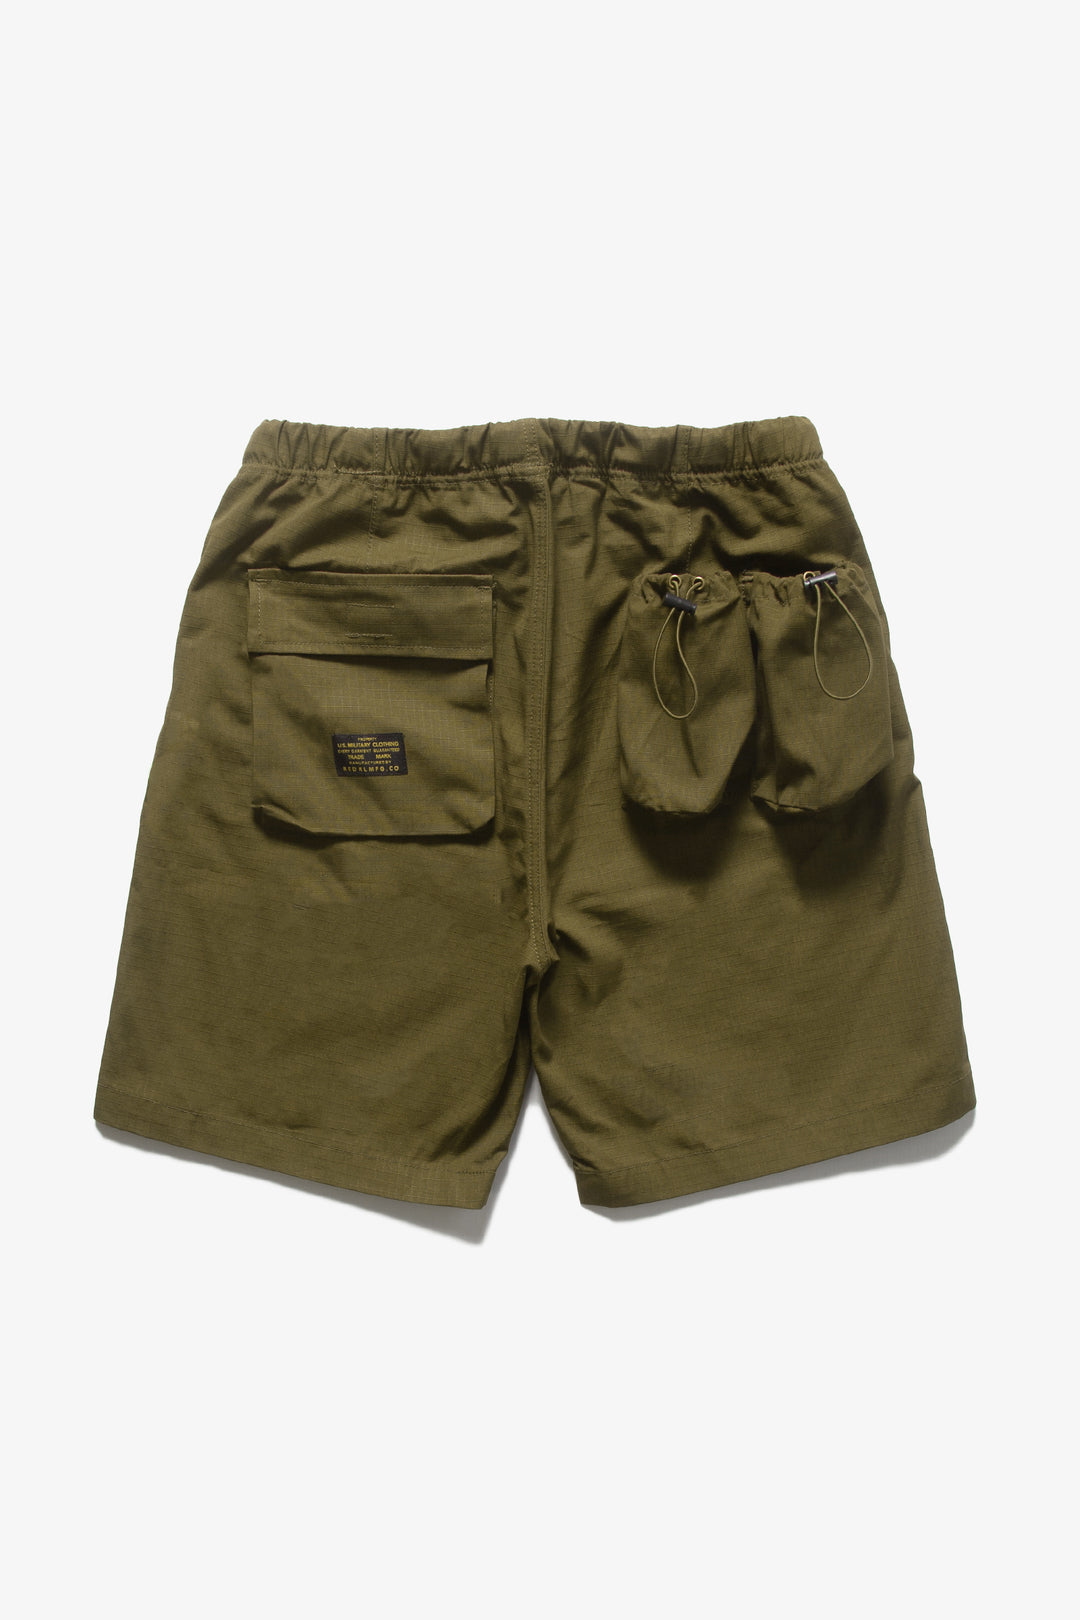 Red Ruggison -  Hiking Shorts - Military